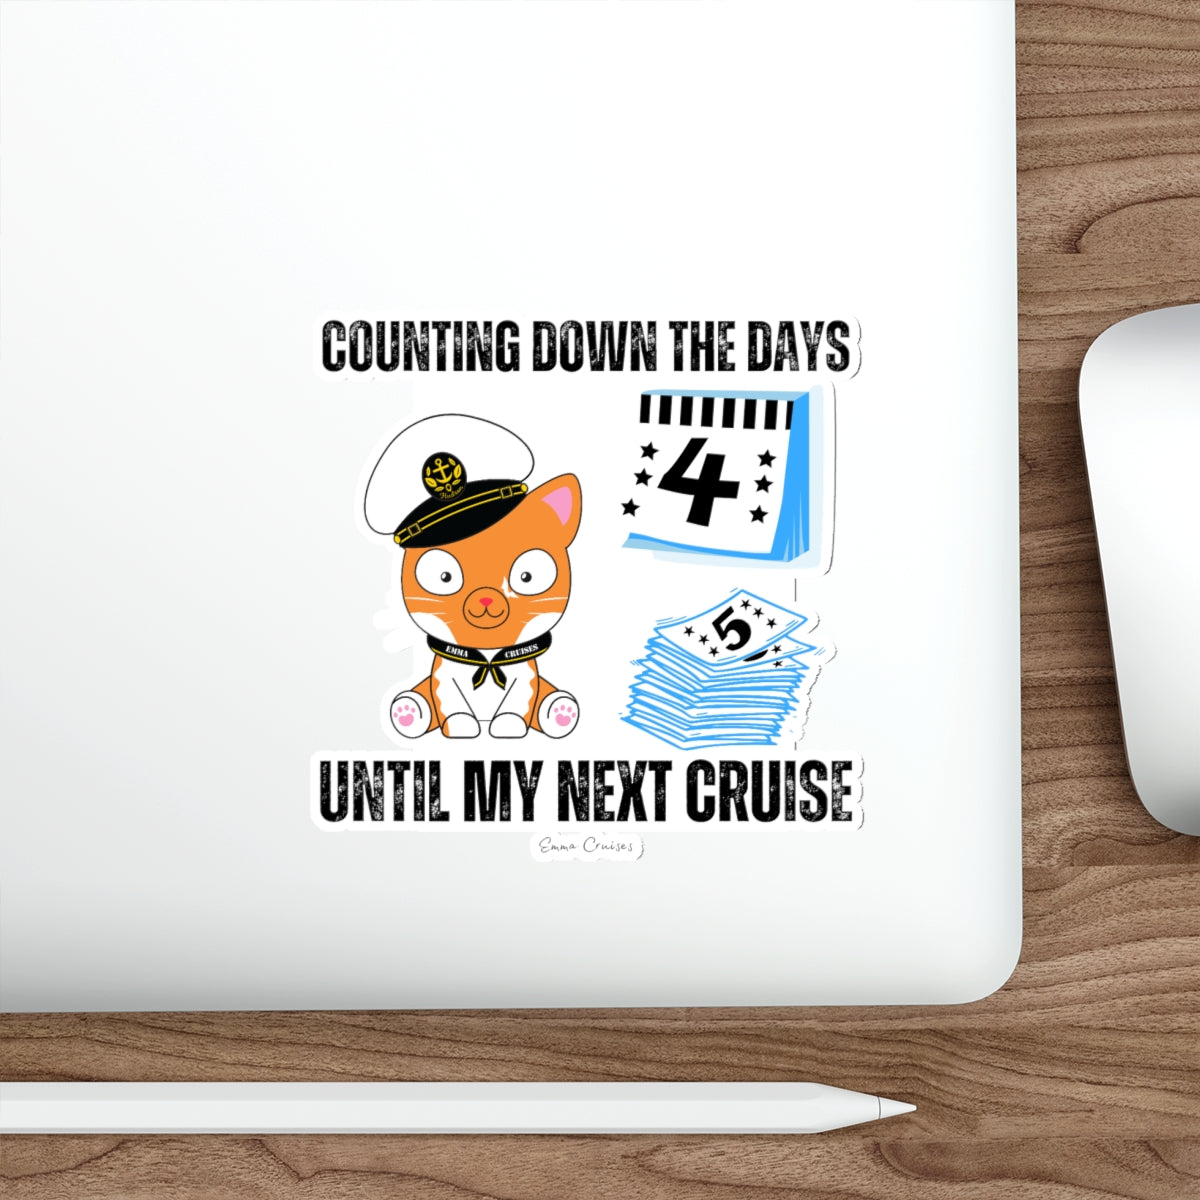 Counting Down the Days - Die-Cut Sticker